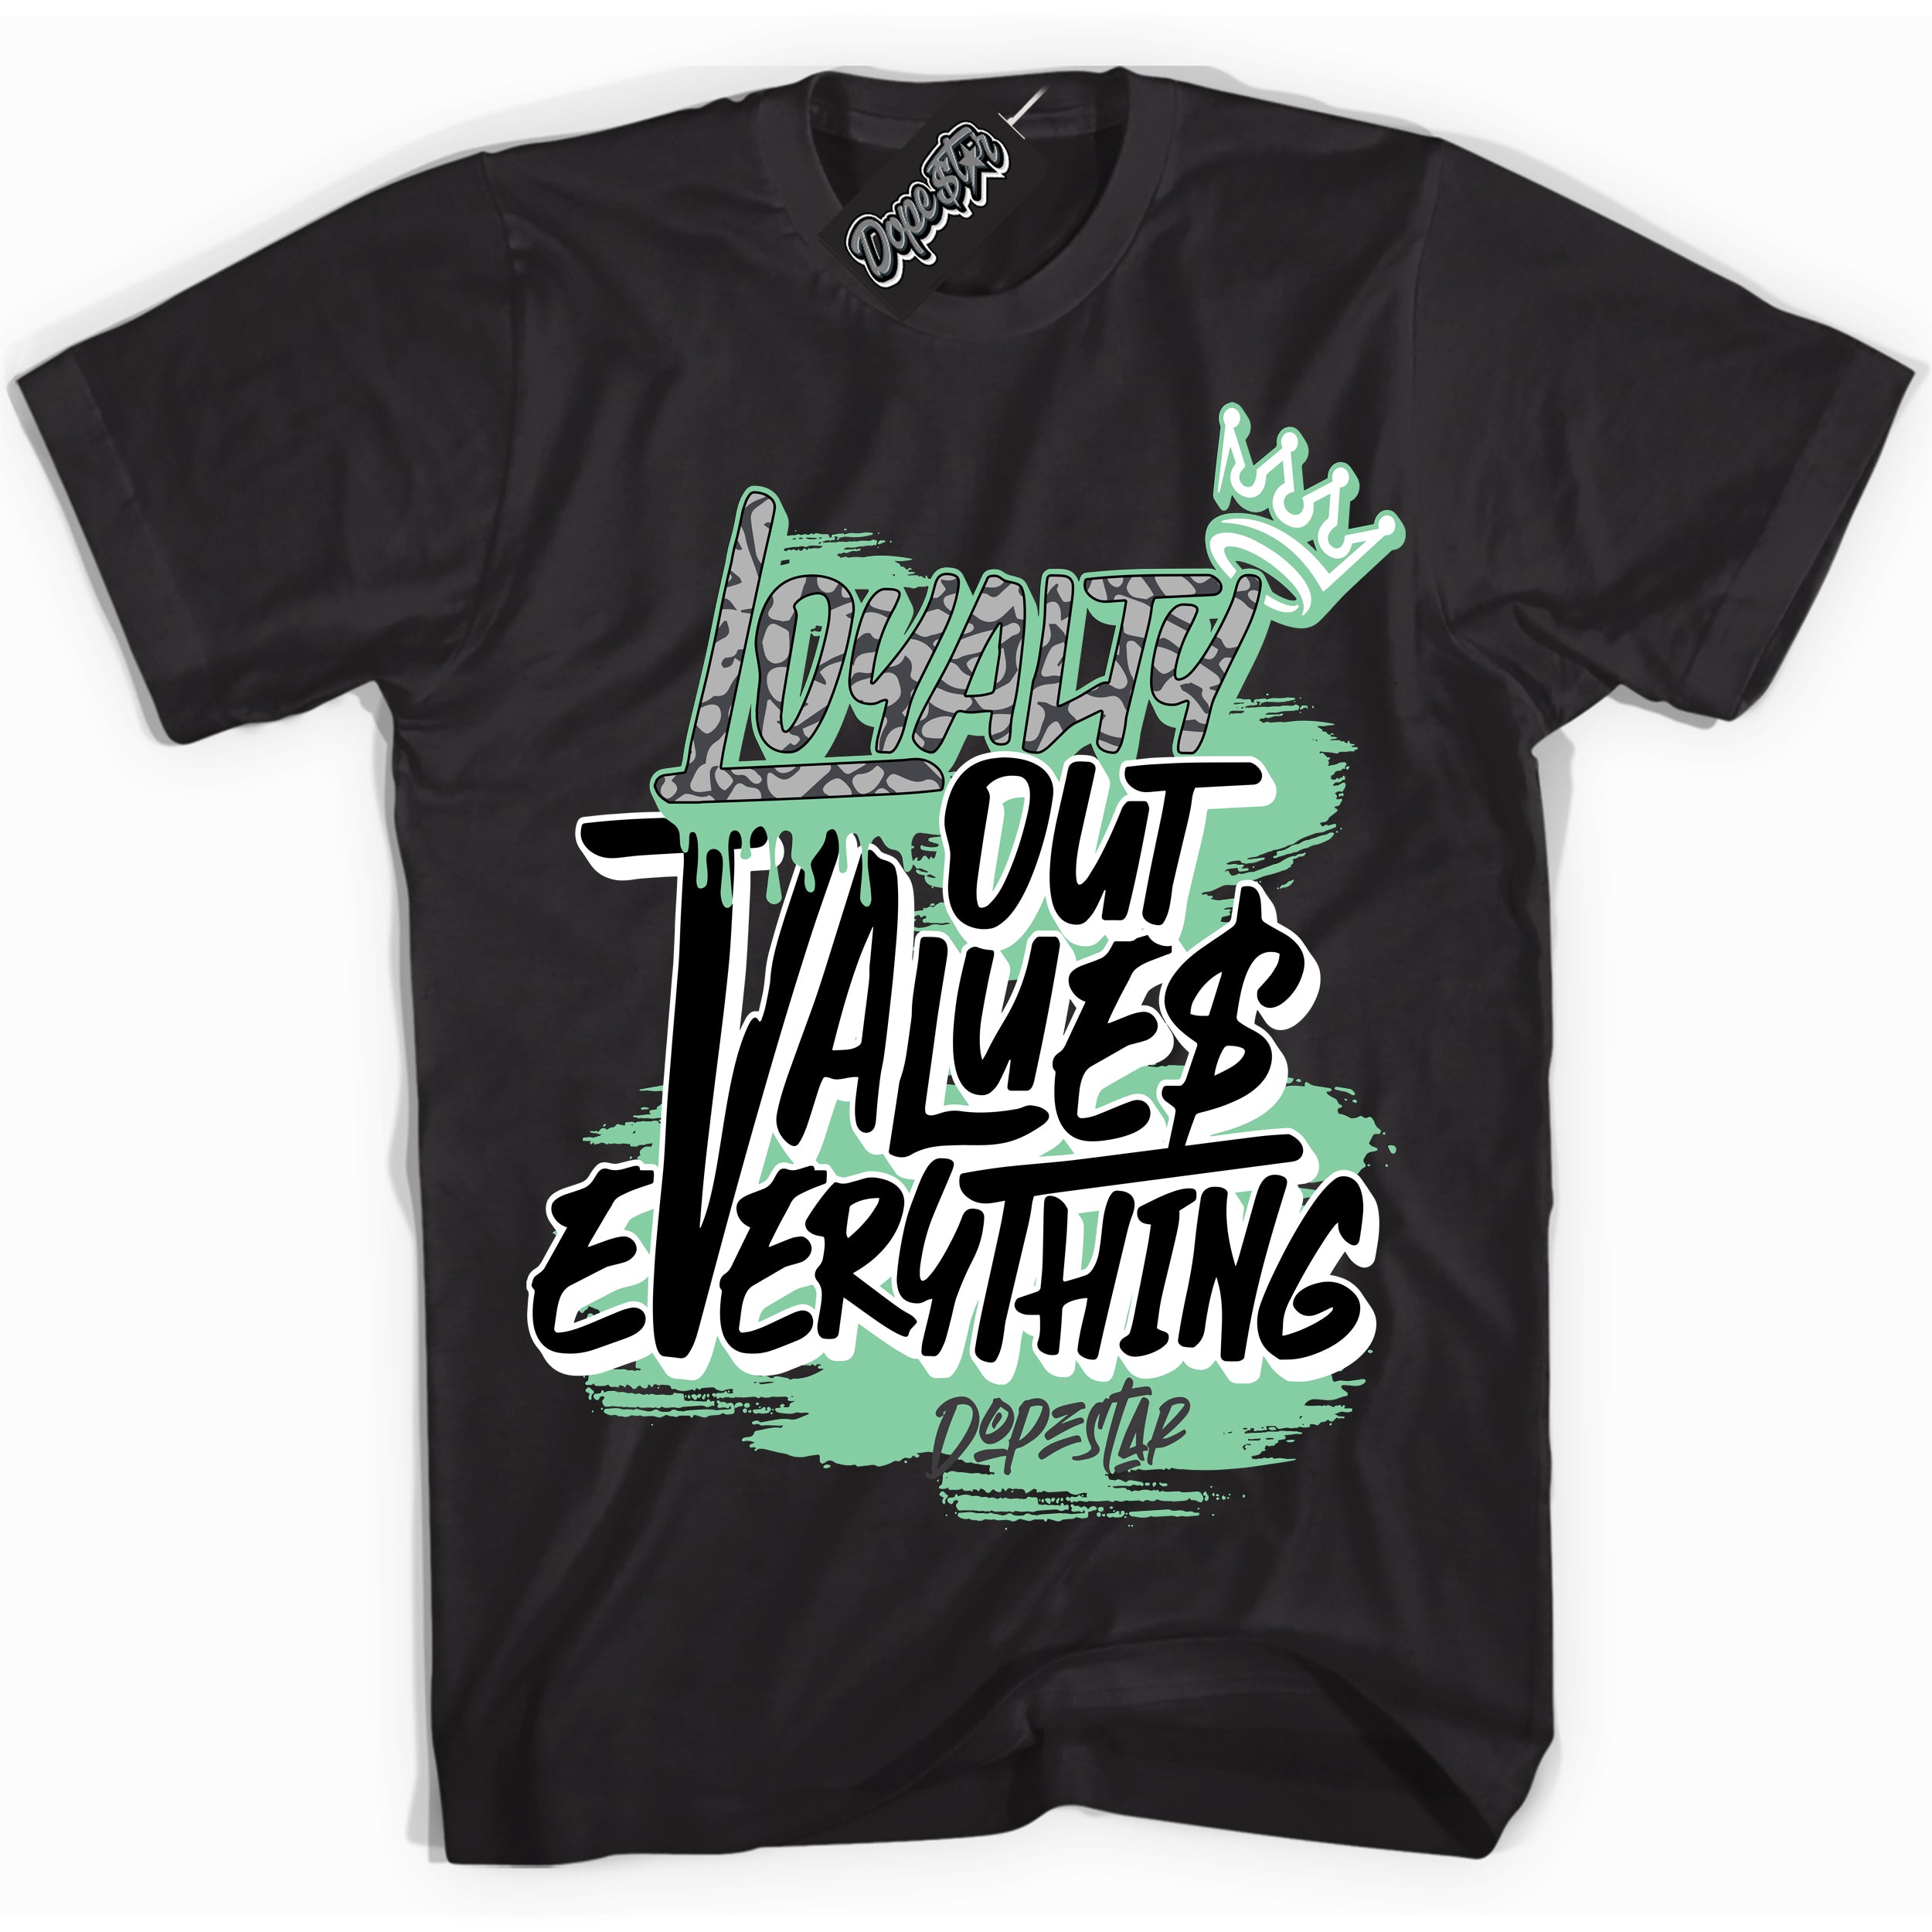 Cool Black Shirt with “ Loyalty Out Values Everything” design that perfectly matches Green Glow 3s Sneakers.